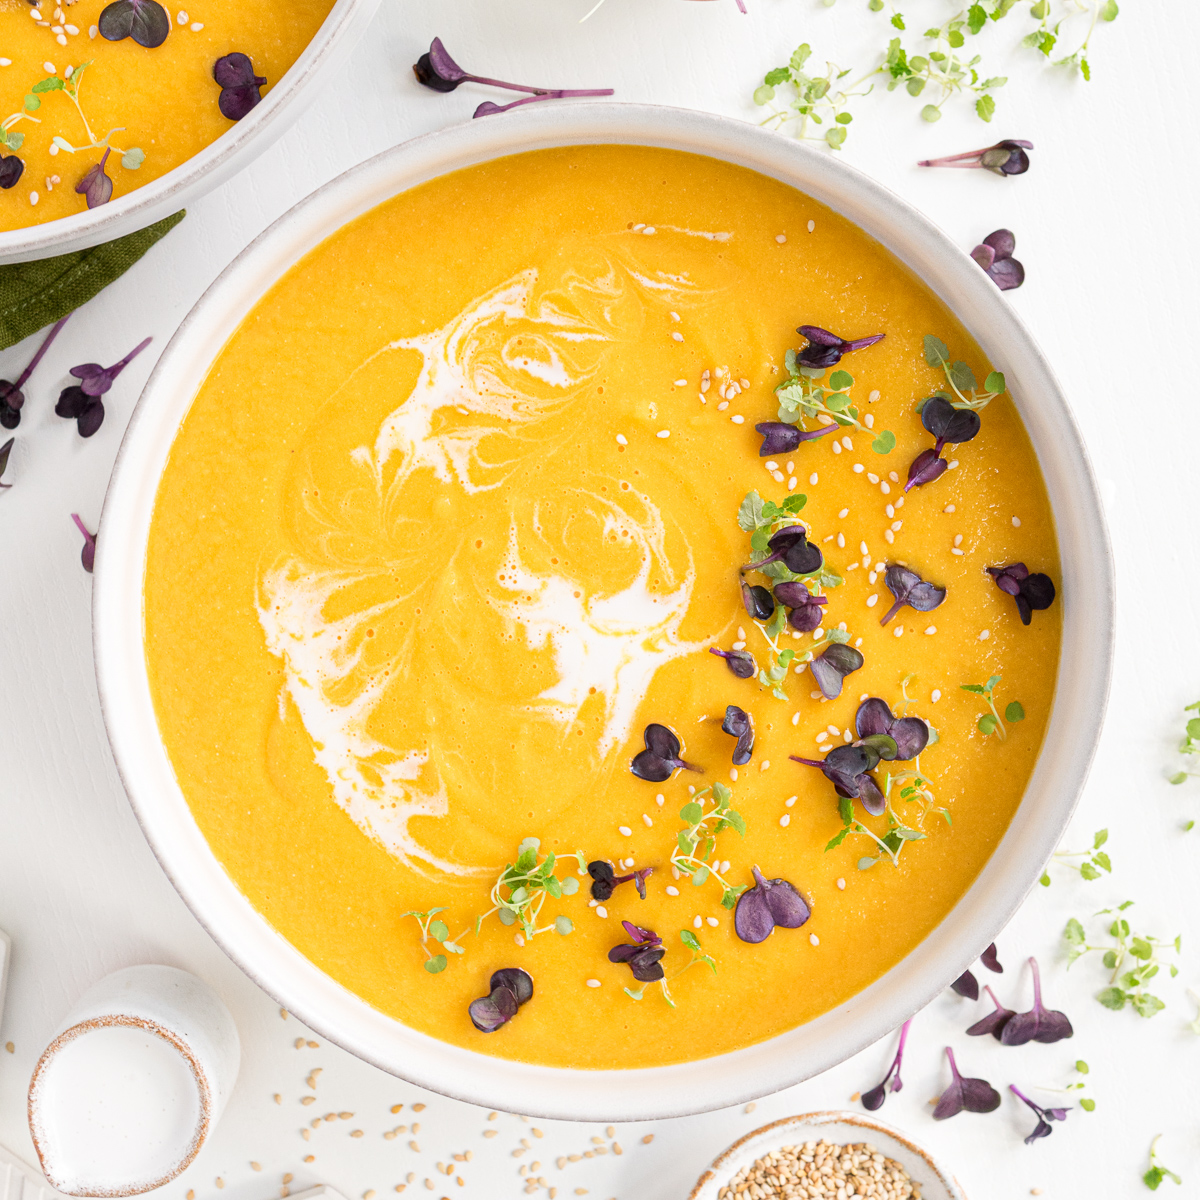 Vegan Carrot Ginger Soup - From The Comfort Of My Bowl